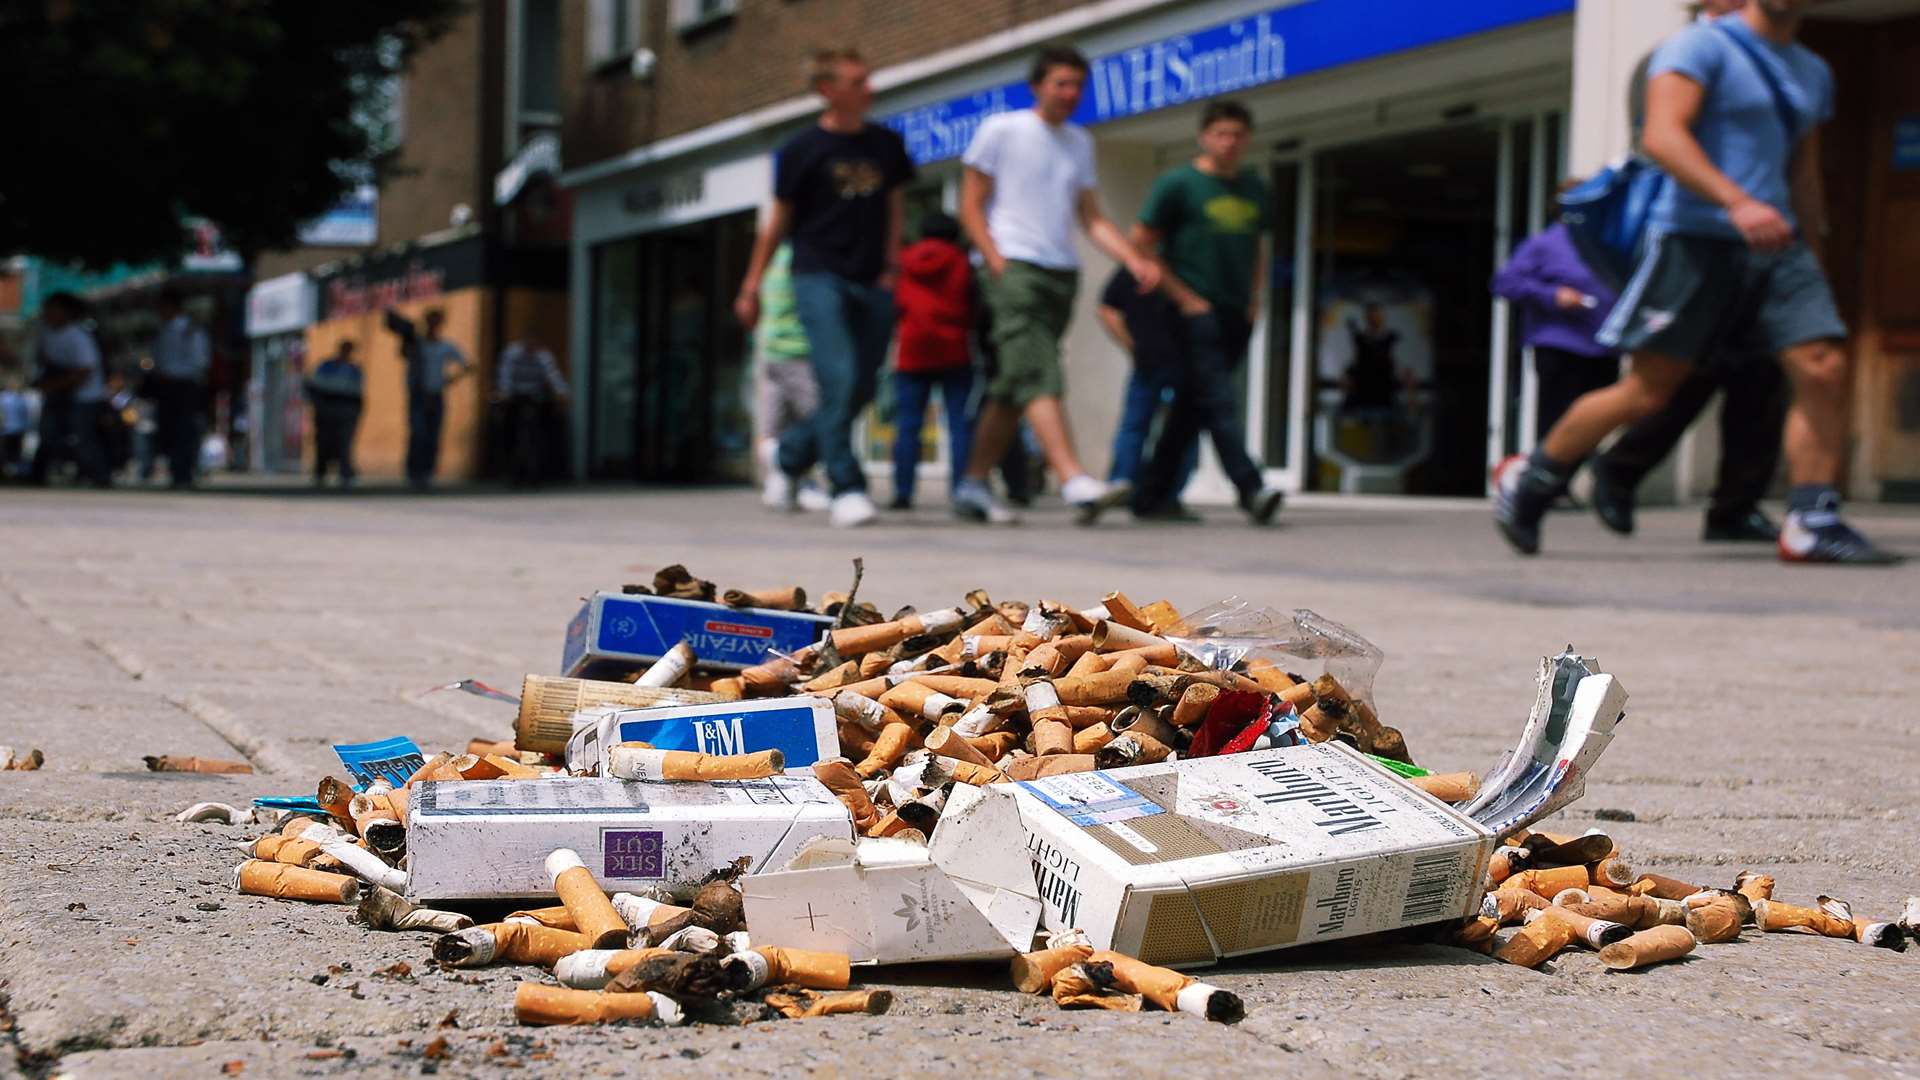 Cigarette litter is one of worse problems